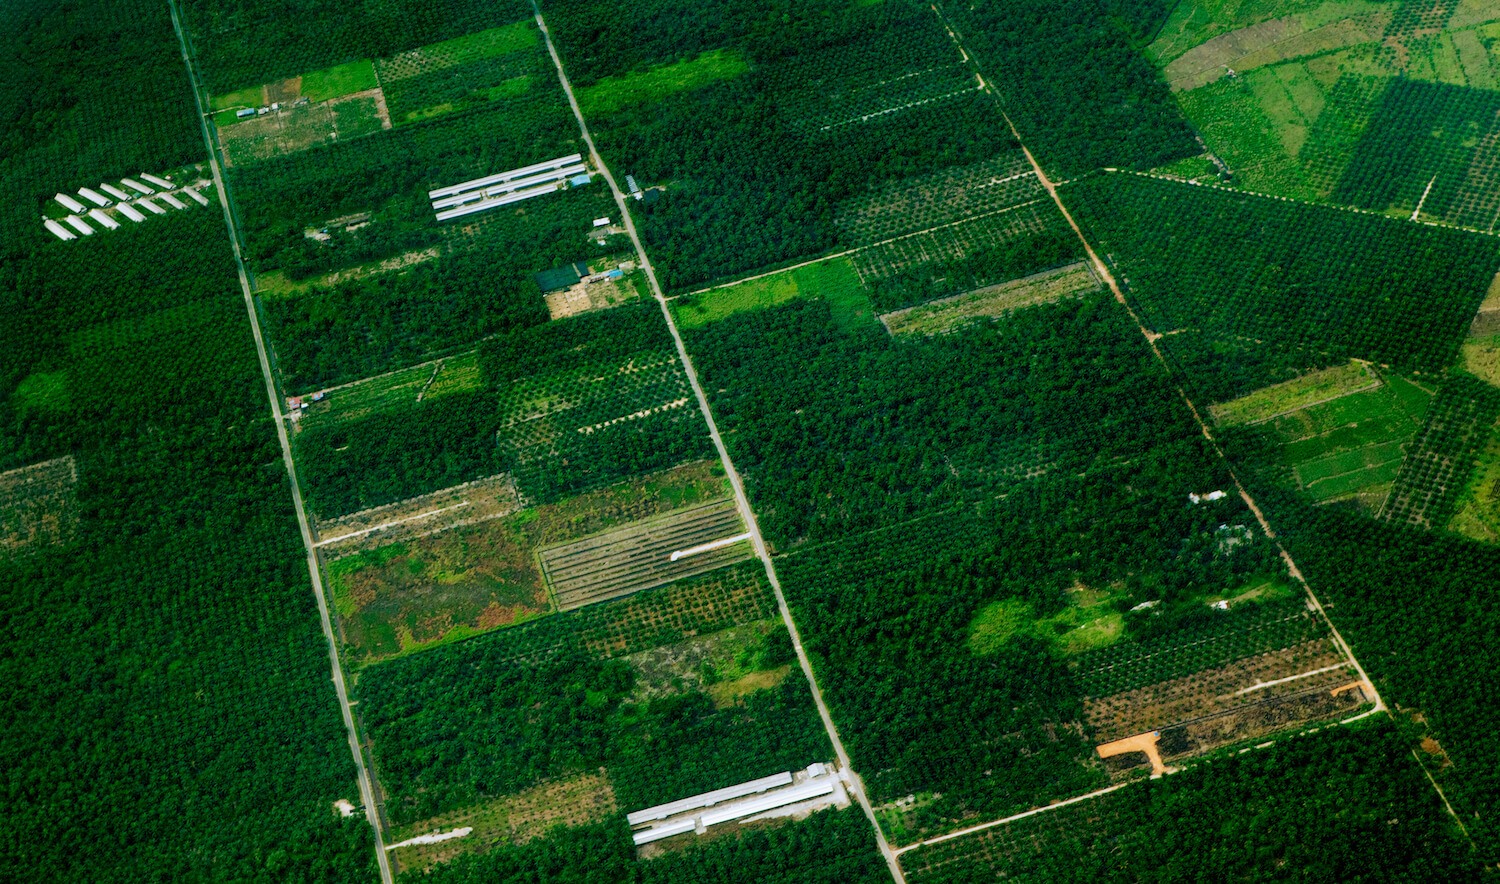 Small rectangular oil palm plantations create a patchwork when viewed from above. Photographed on the west coast of continental Malaysia, state of Kedah. March 2021